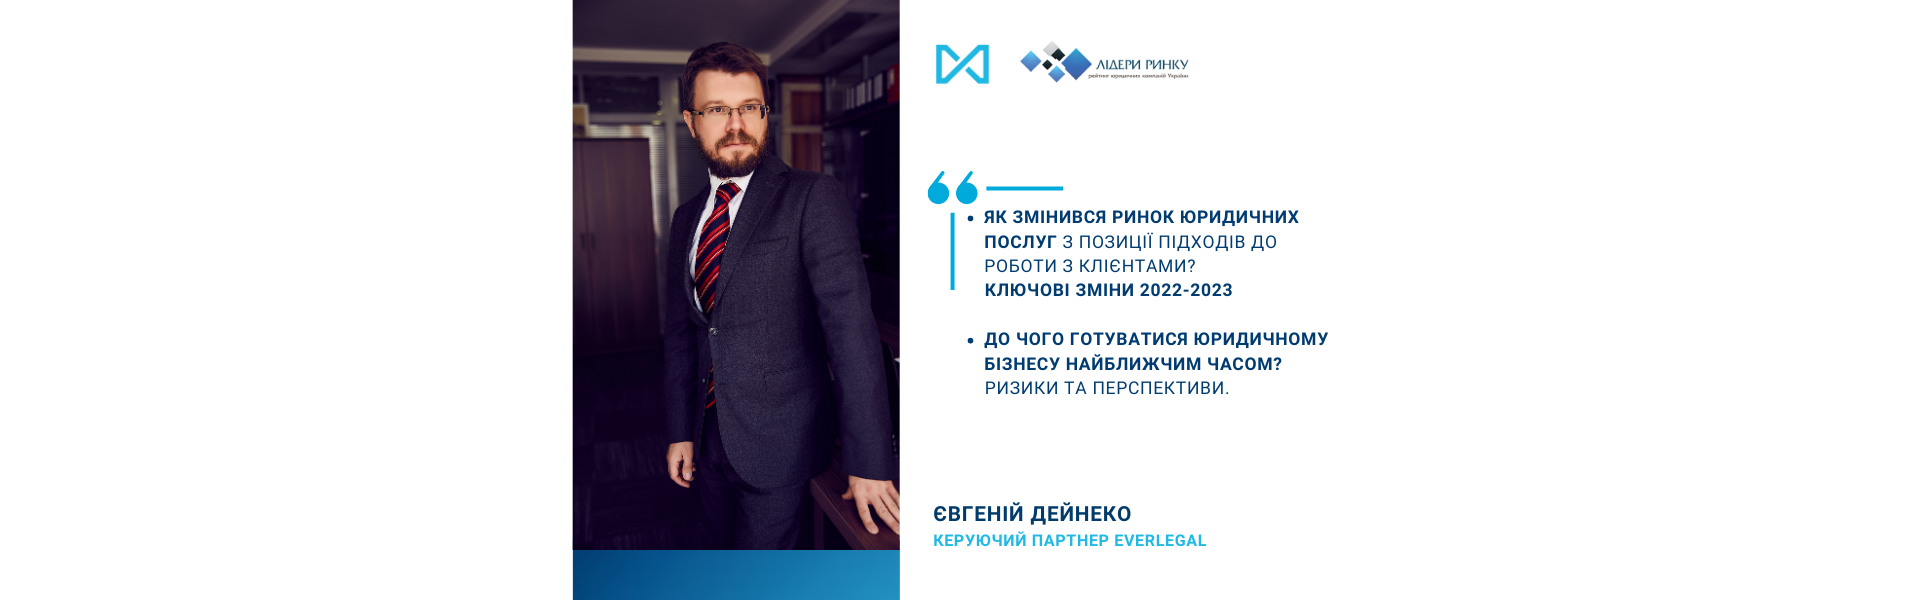 Managing Partner at EVERLEGAL - about the legal services market 2022-2023